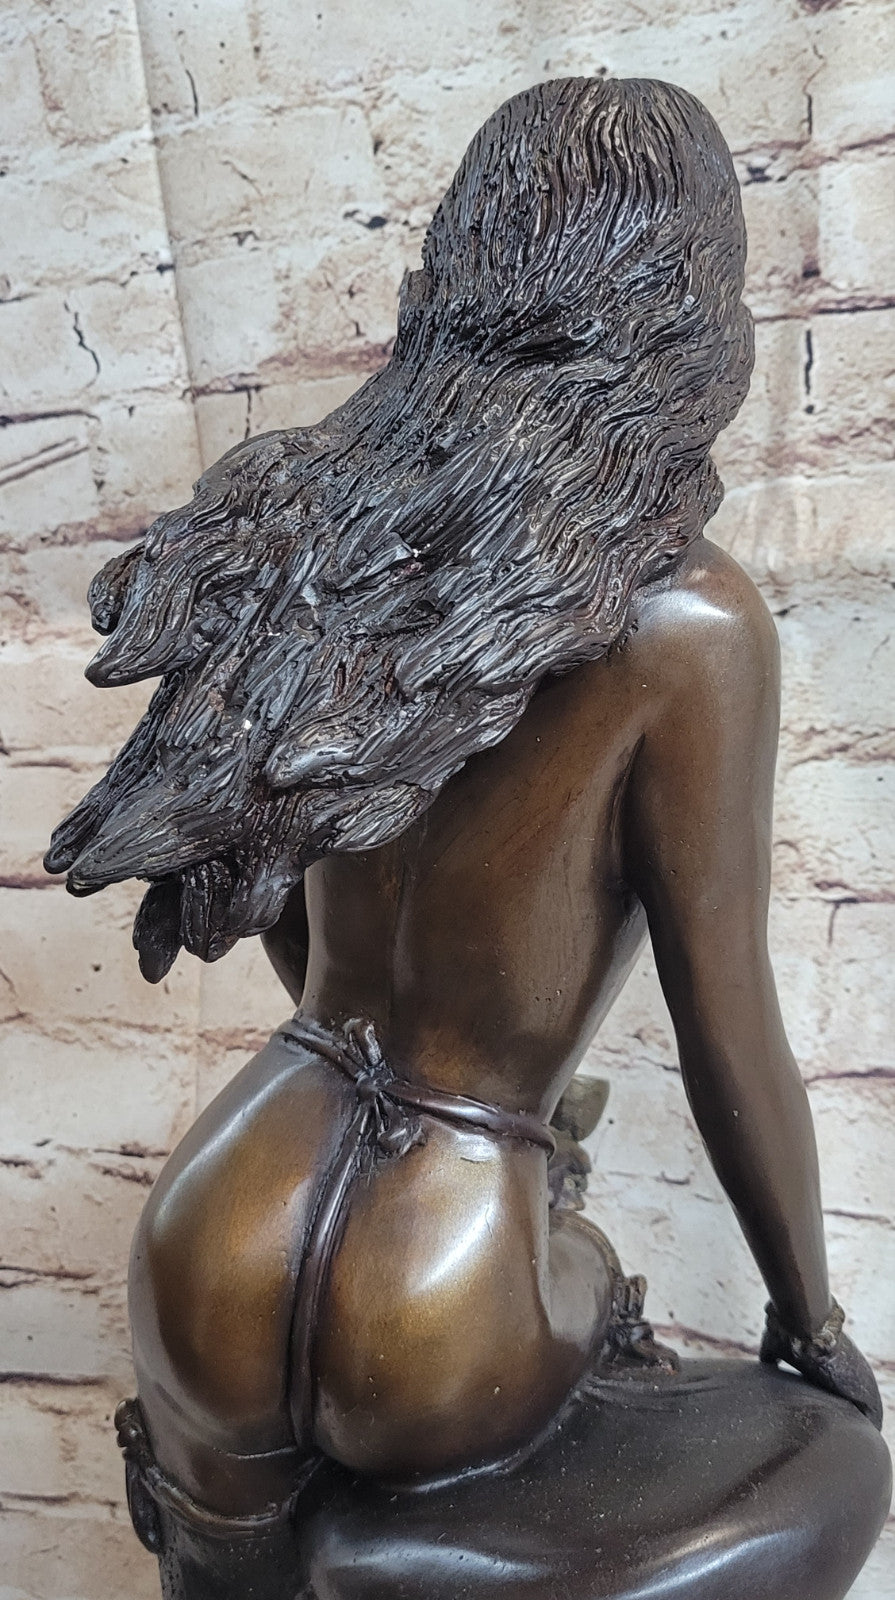 Home and Office Decor: Collett Signed Bronze Nude Woman Sculpture